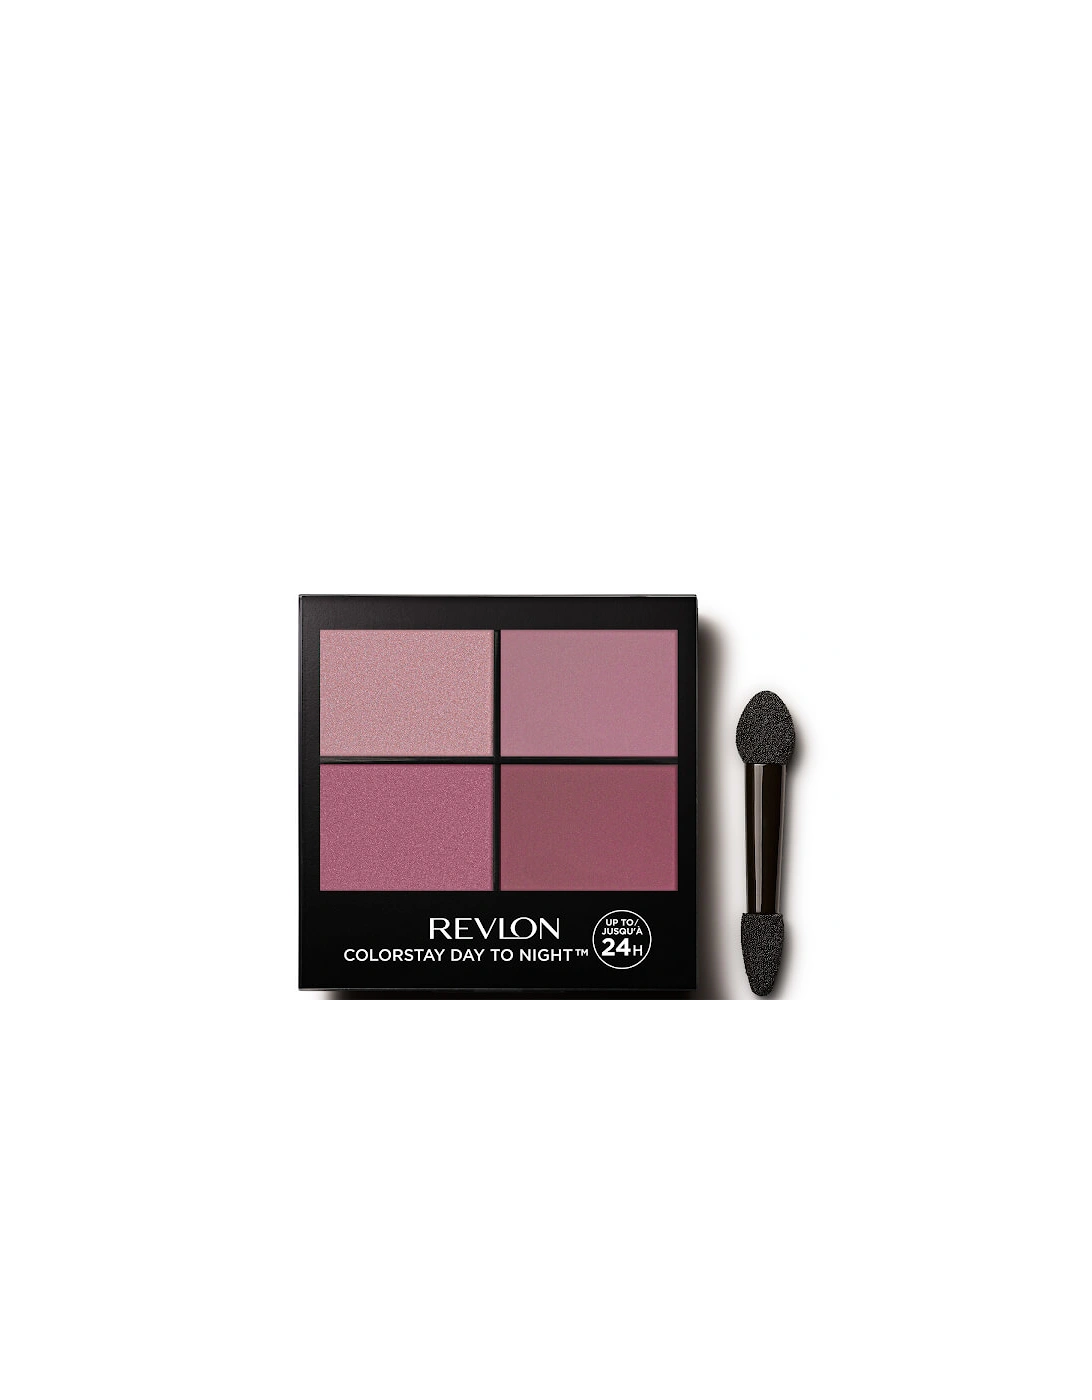 Colorstay 24 Hour Eyeshadow Quad - Exquisite, 2 of 1